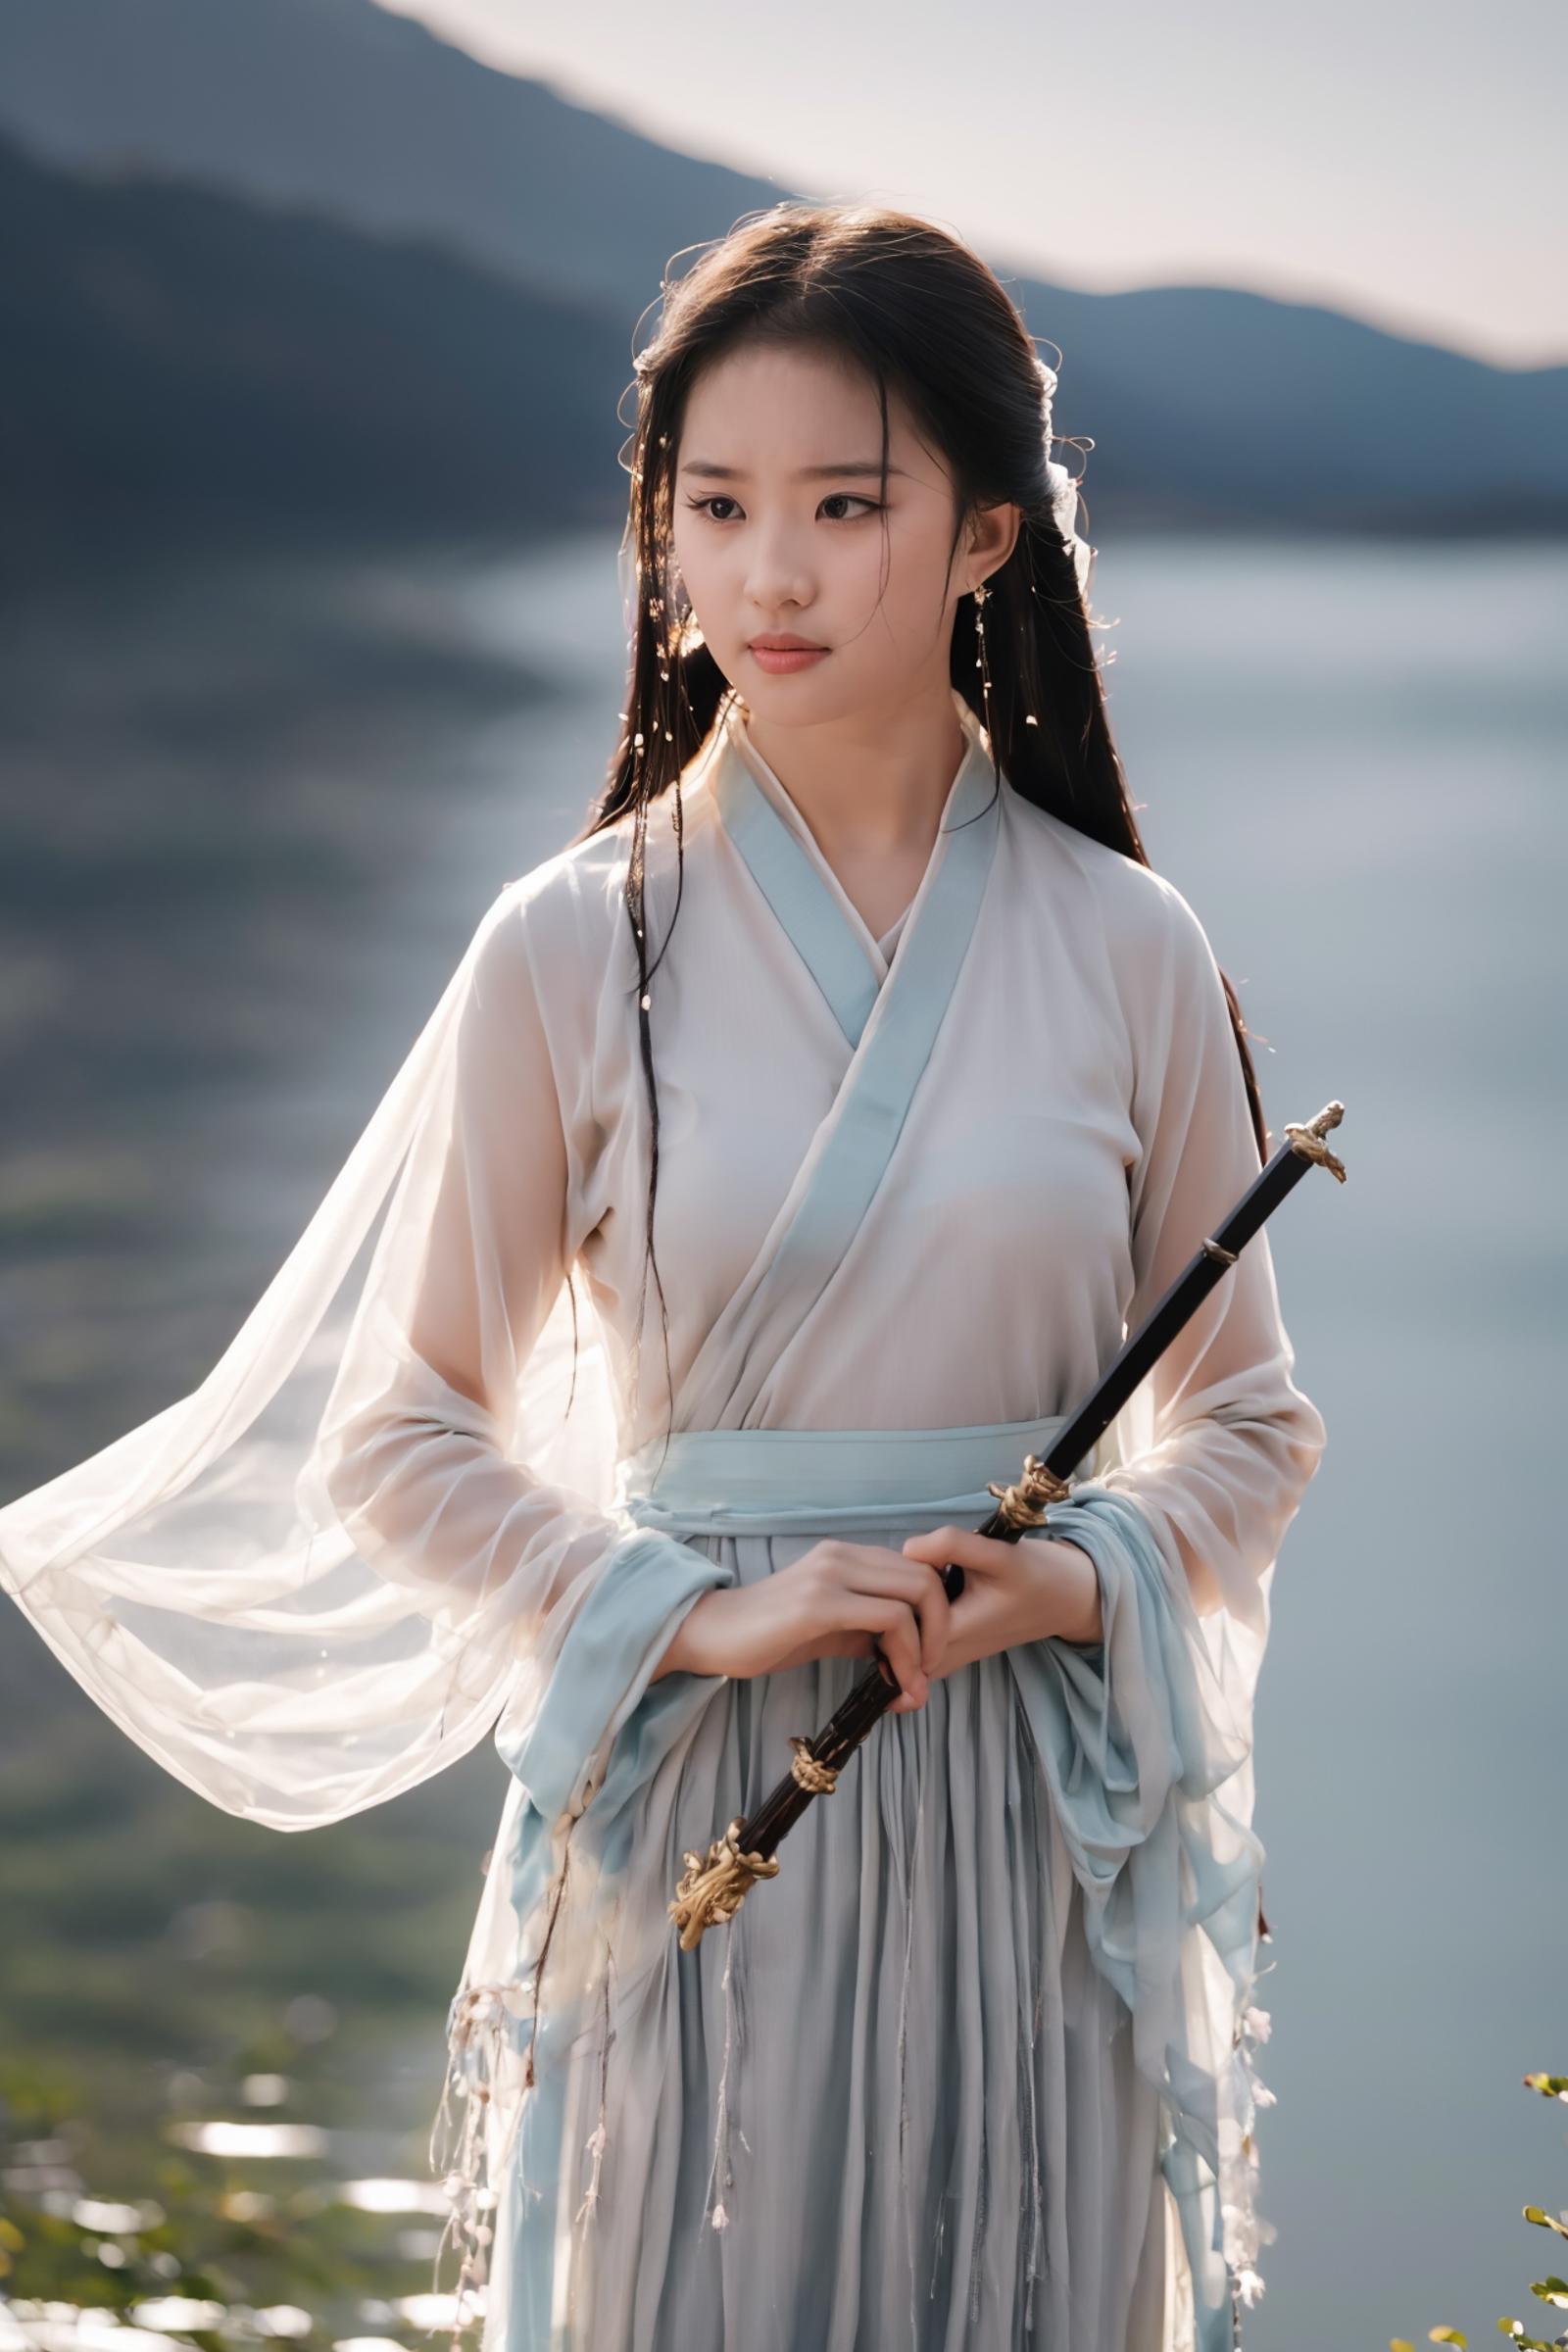 LiuYifei-Younger 神仙妹妹 刘亦菲 image by izitn